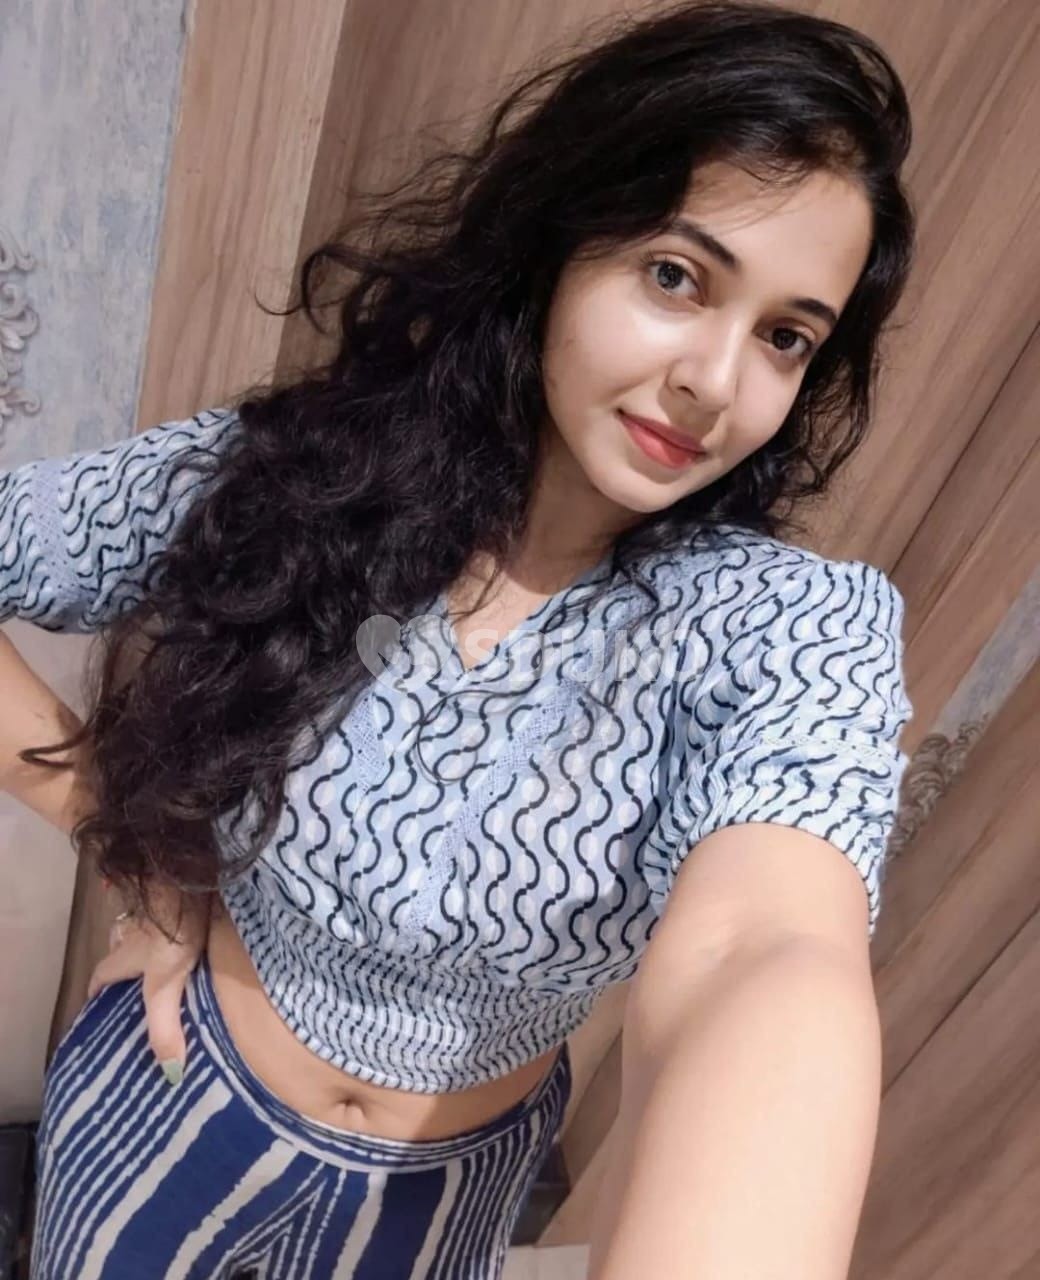 Myself Kavya VIP low price best genuine and trustable b-sexual women in Ahmedabad safe and secure place 100% trustable s